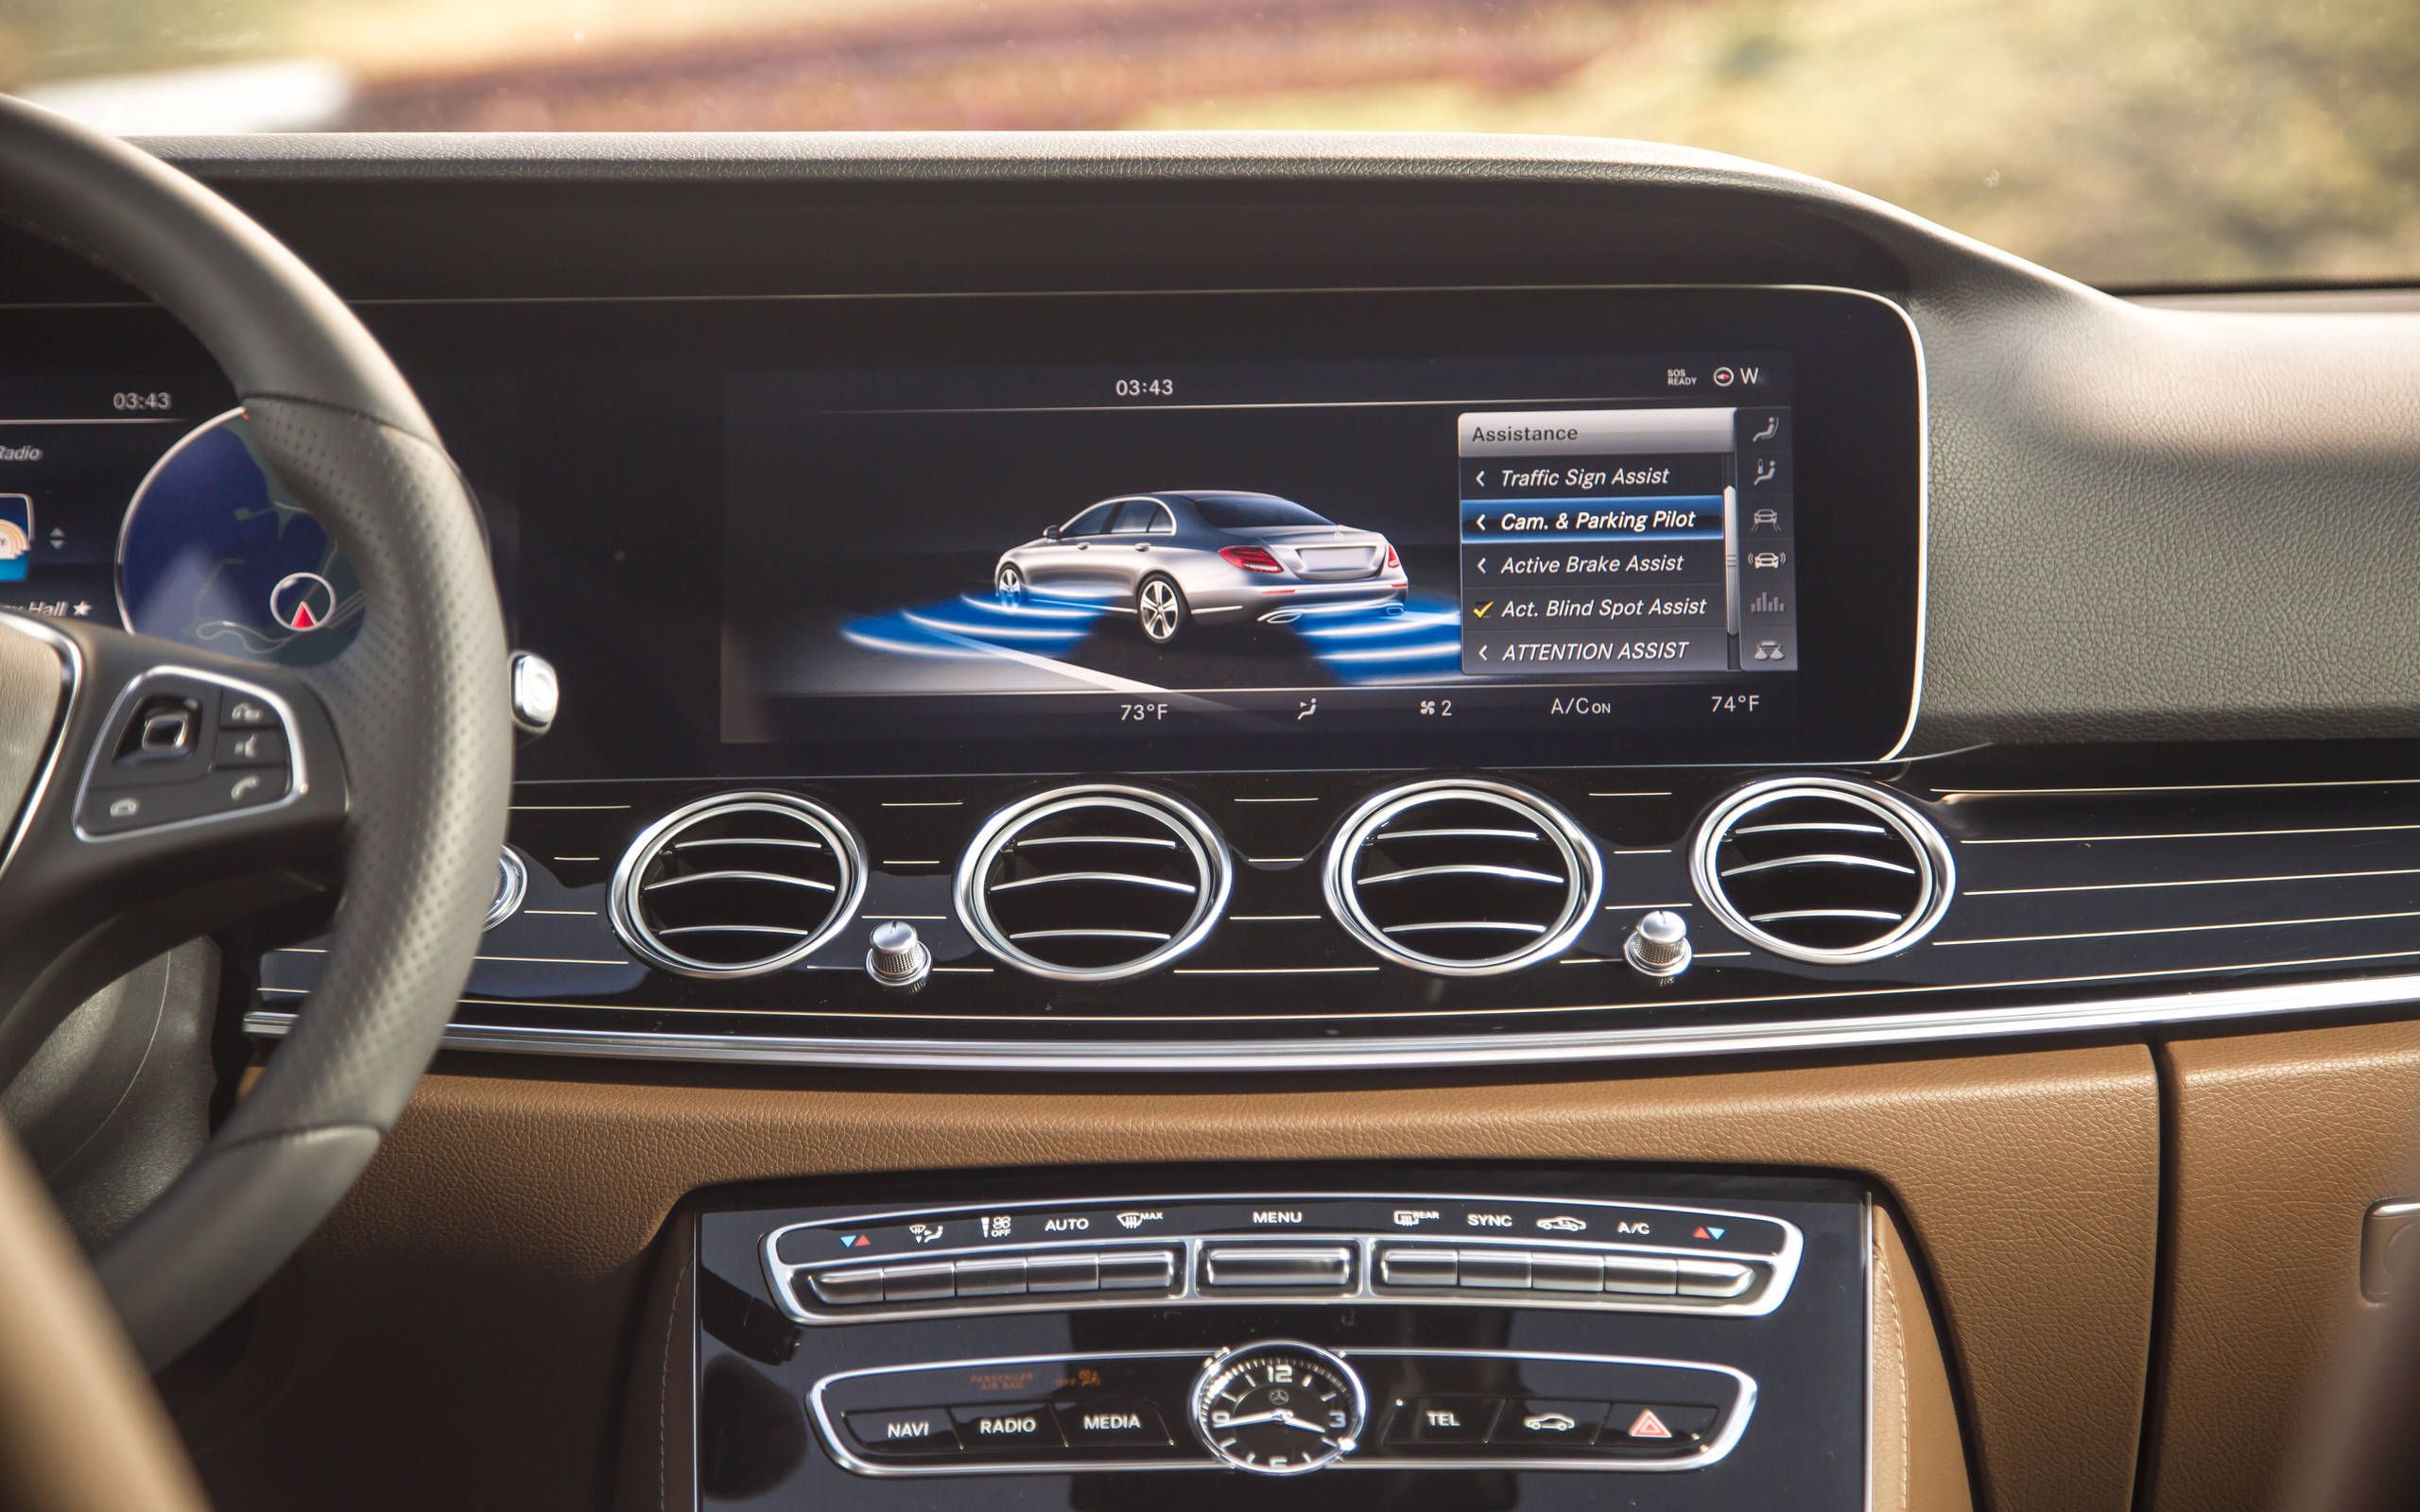 Testing the tech on the 2017 Mercedes-Benz E300